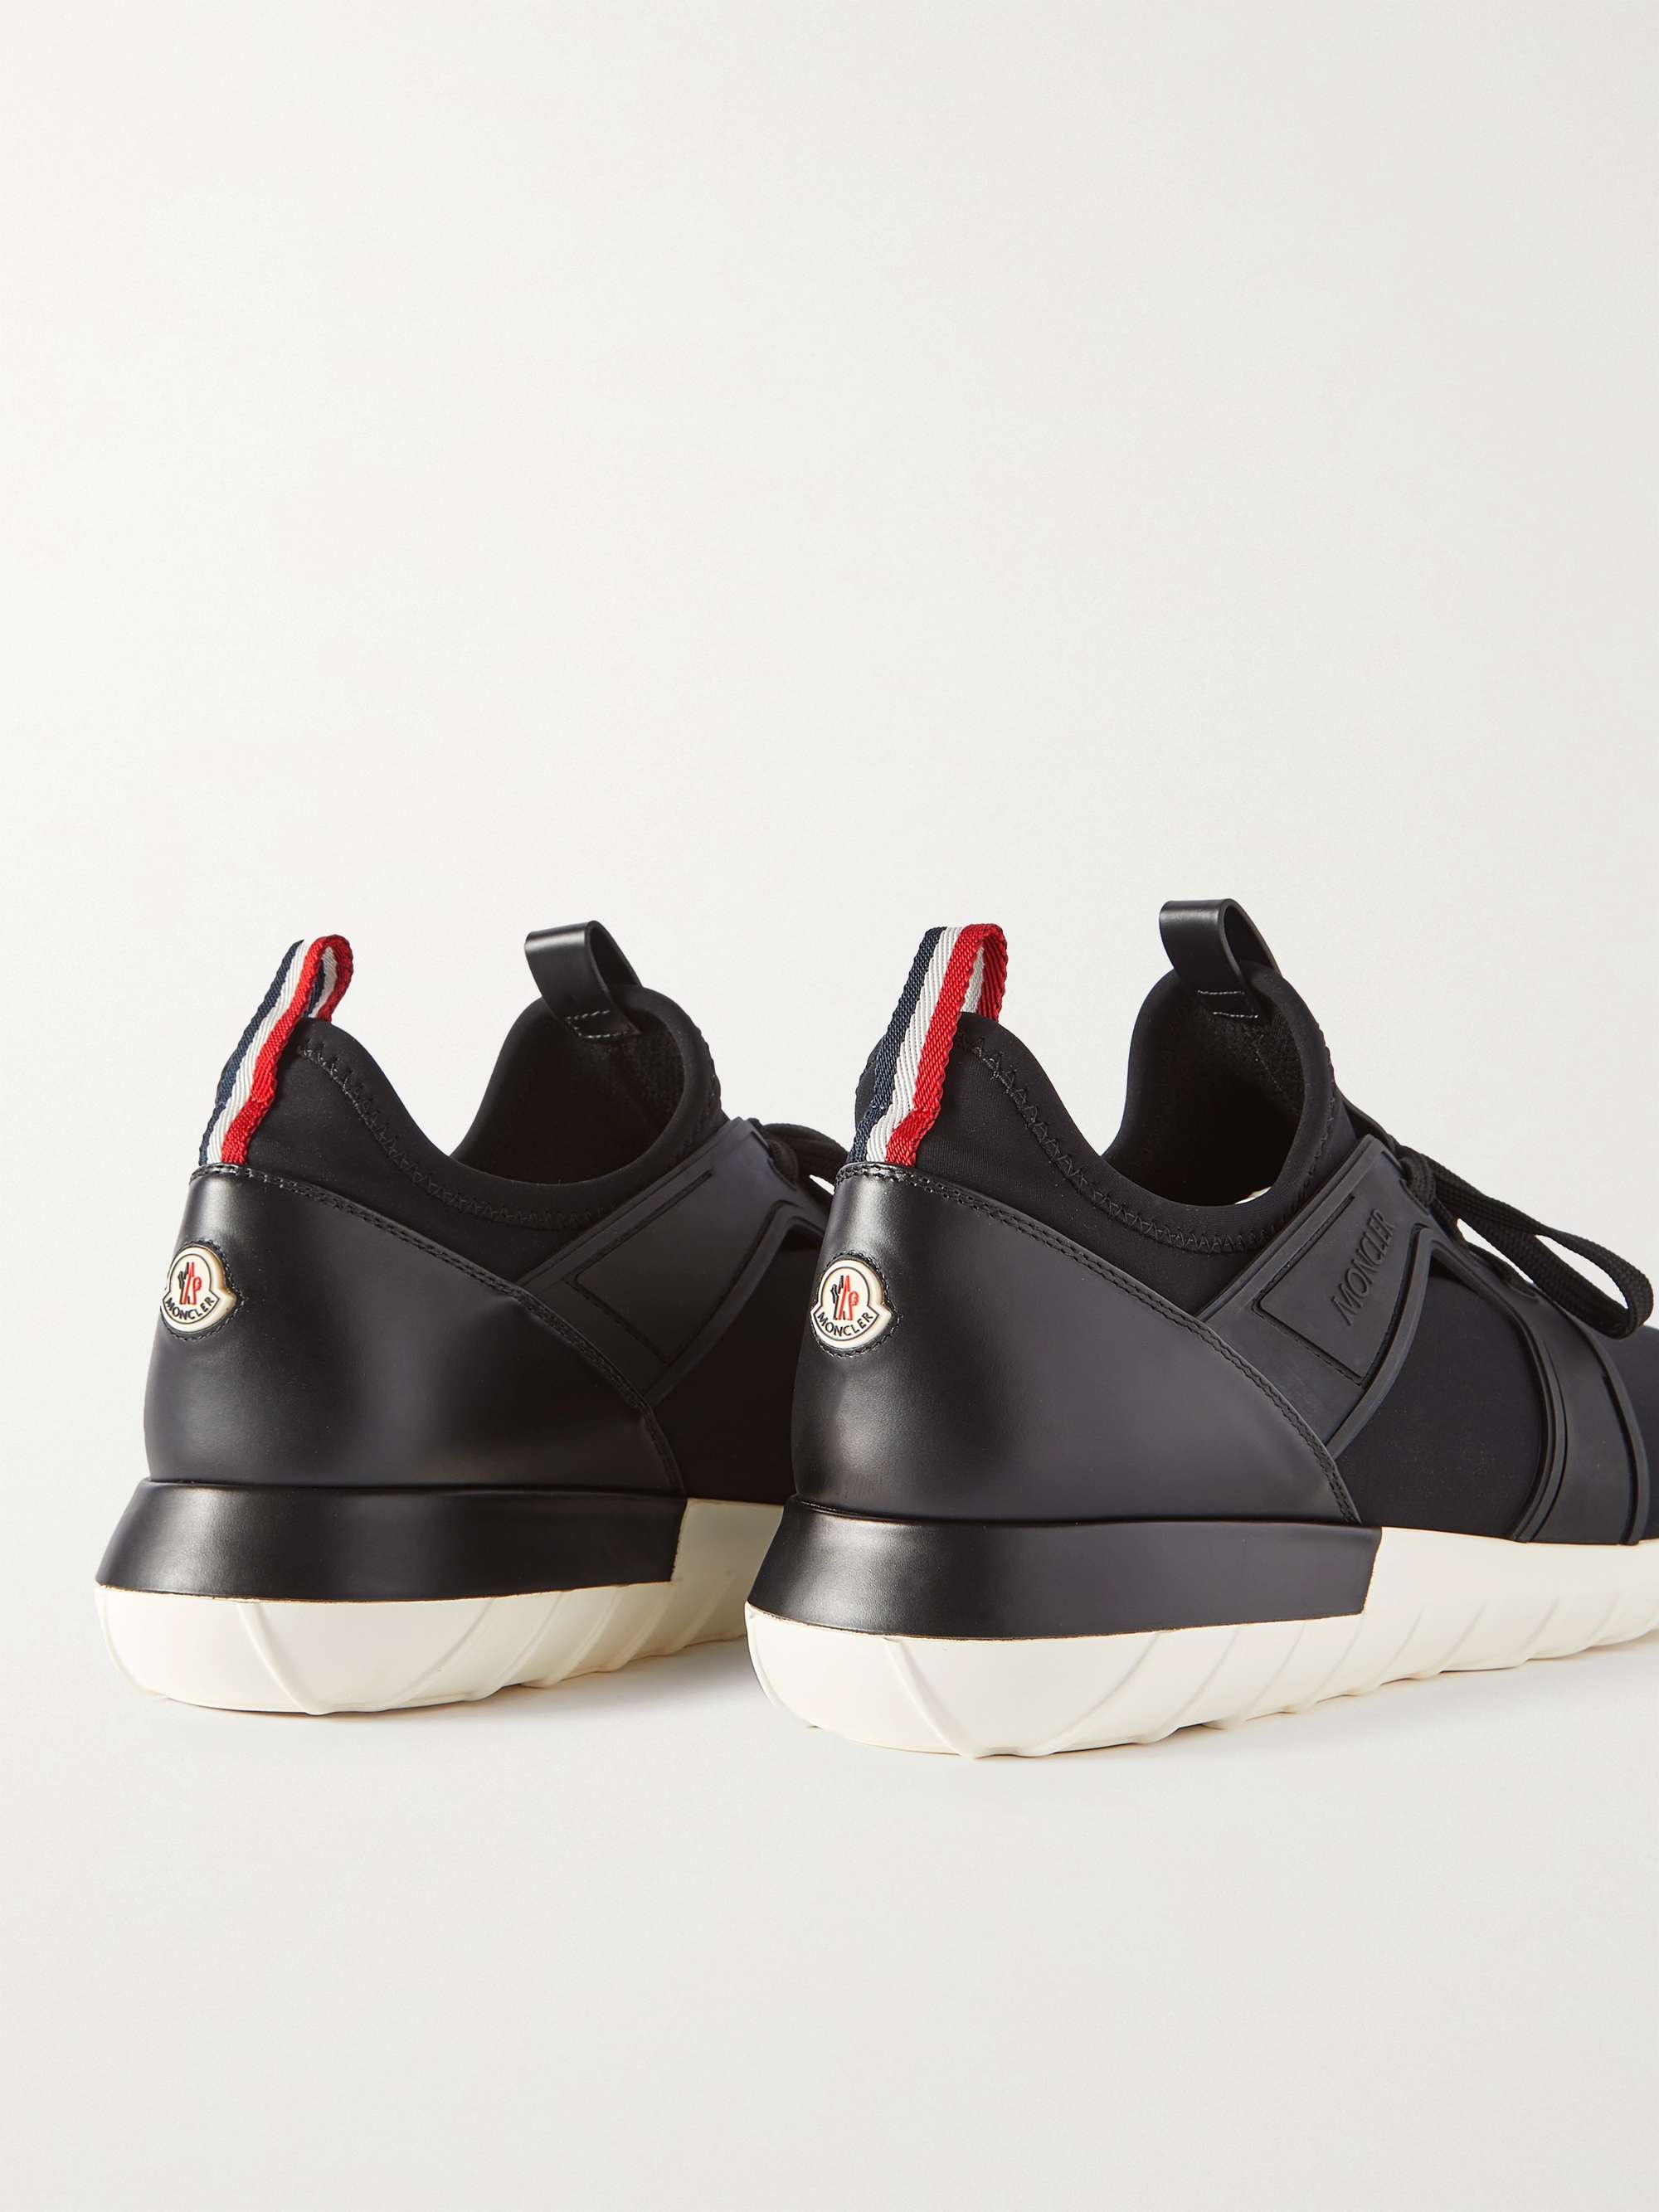 MONCLER Emilien Rubber and Leather-Trimmed Neoprene Sneakers | MR PORTER